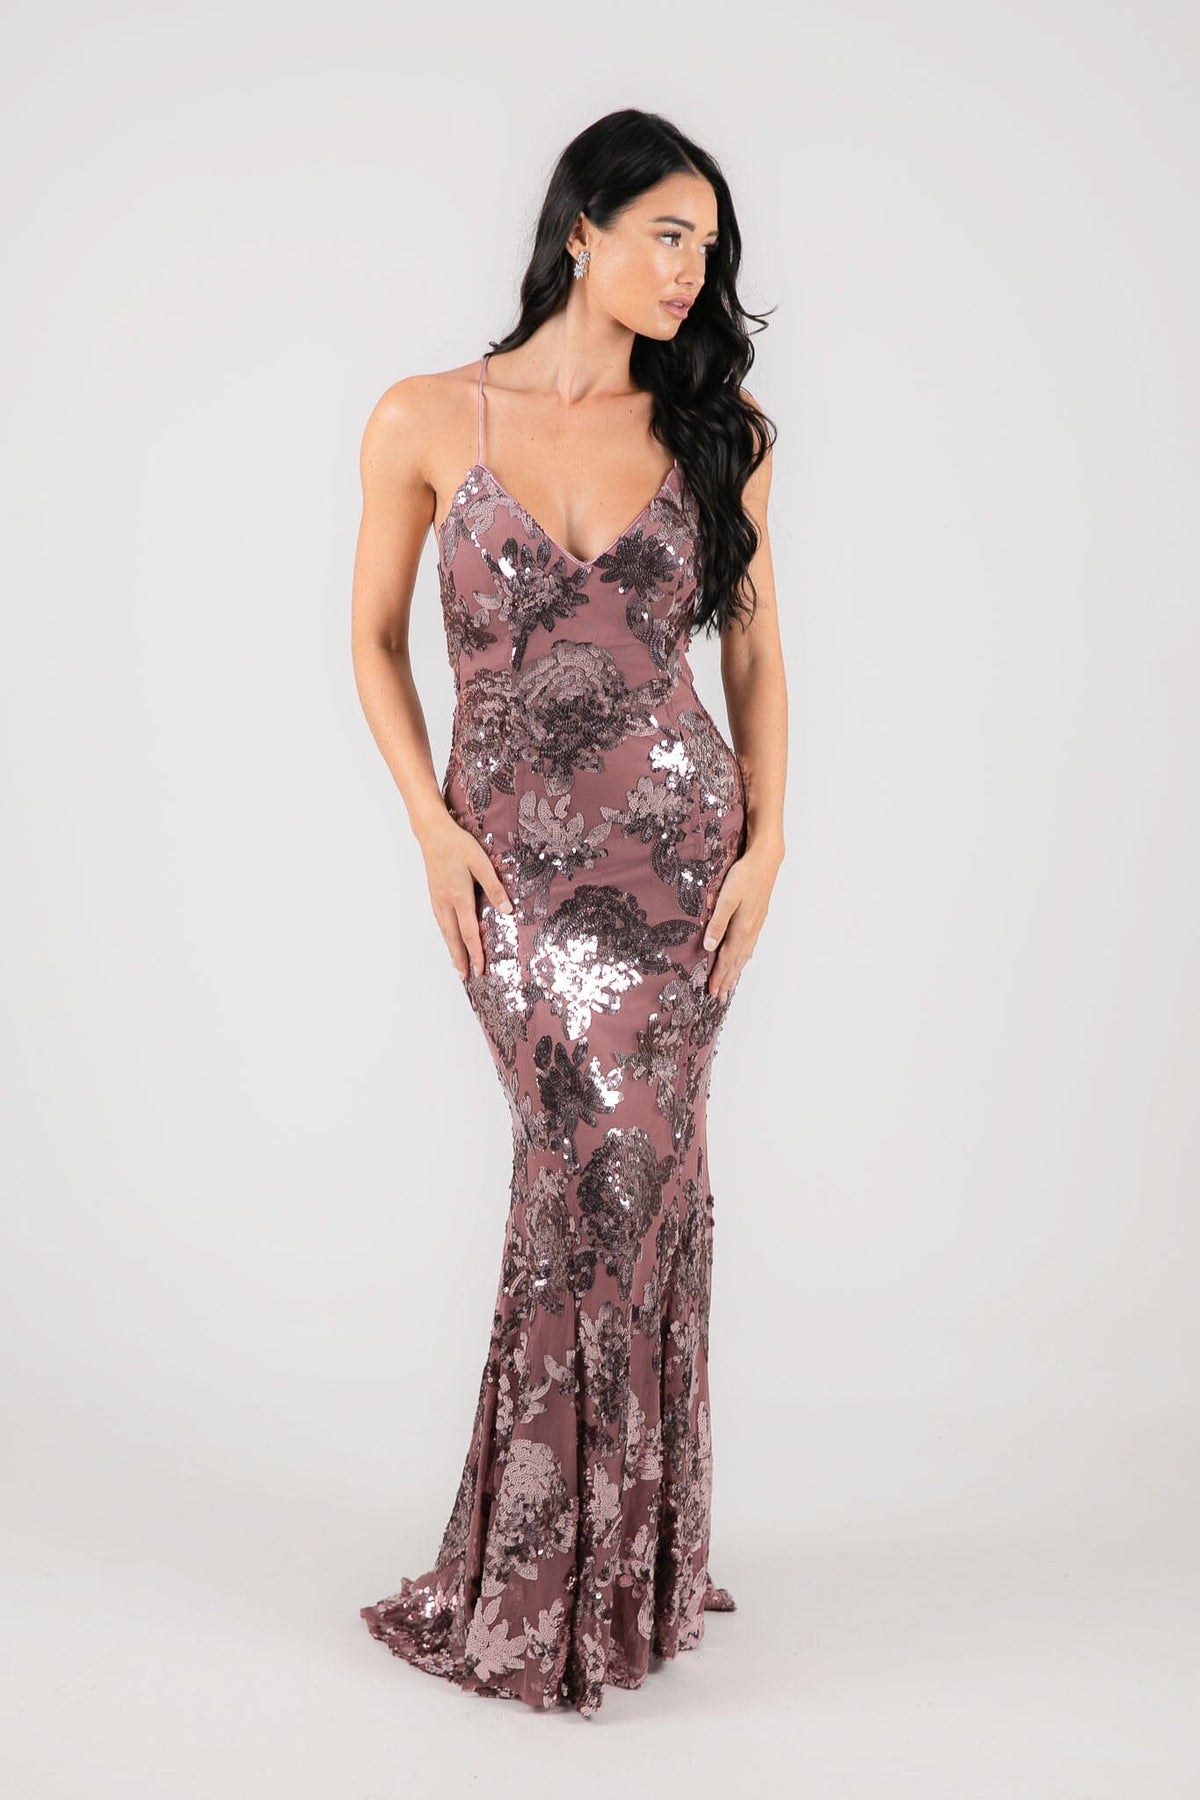 Shop Formal Dress - Calista Sequin Gown - Dusty Rose fourth image